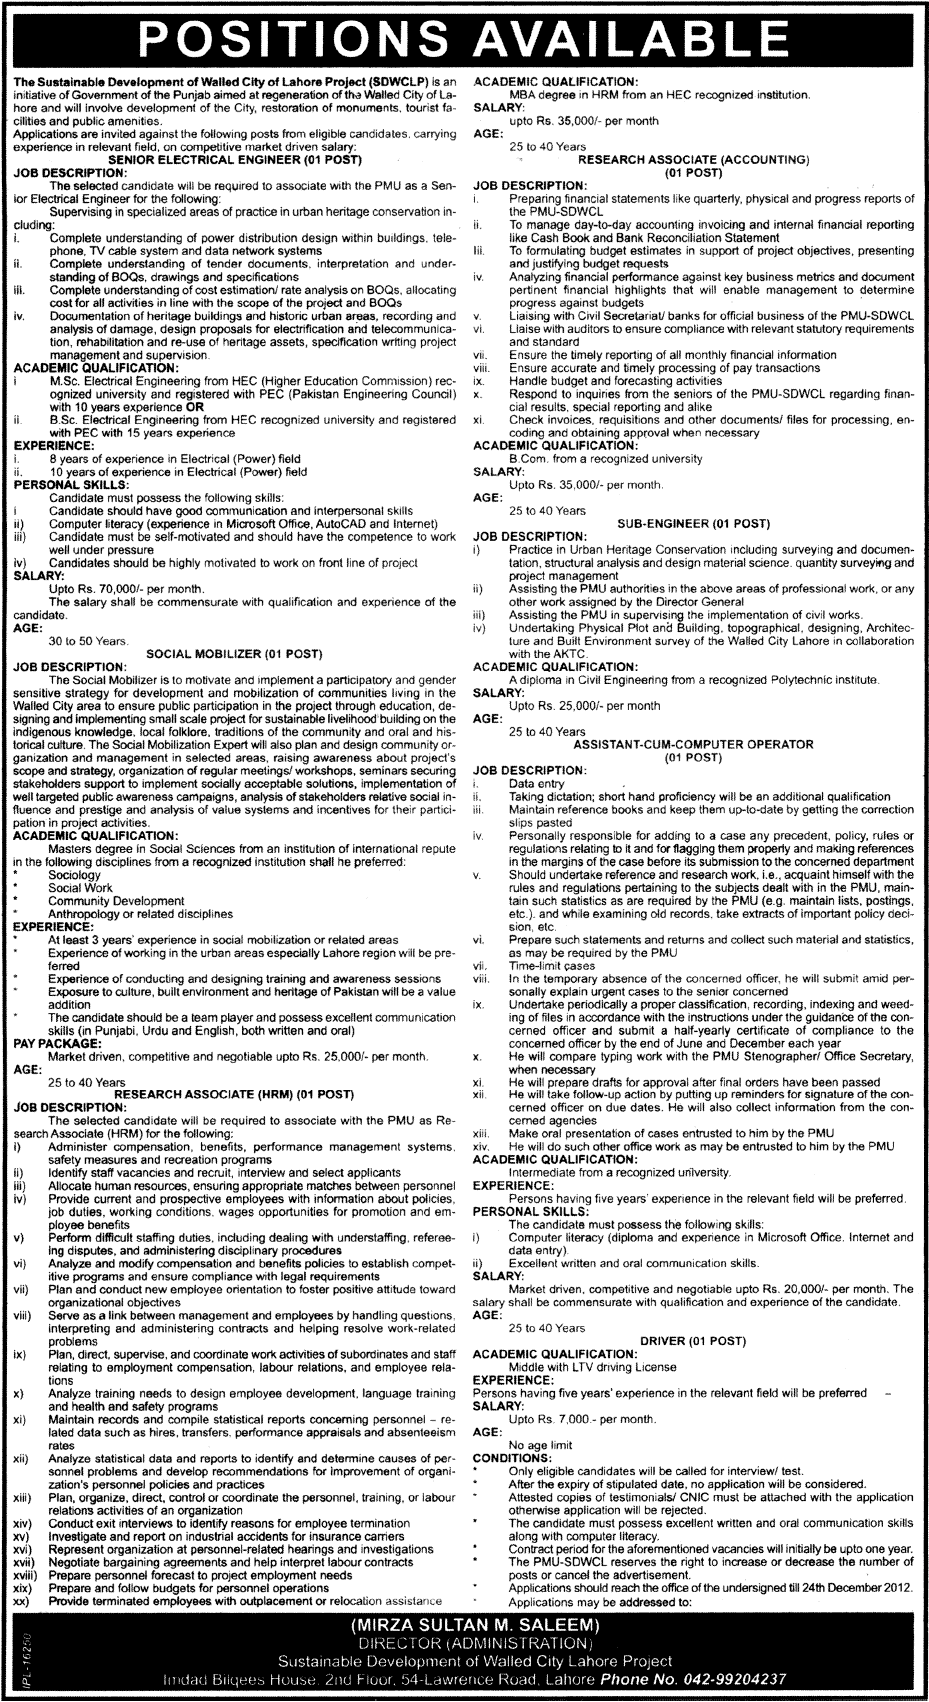 SDWCLP Lahore Vacancies 2012 for Engineers, Research Associates & Other Staff